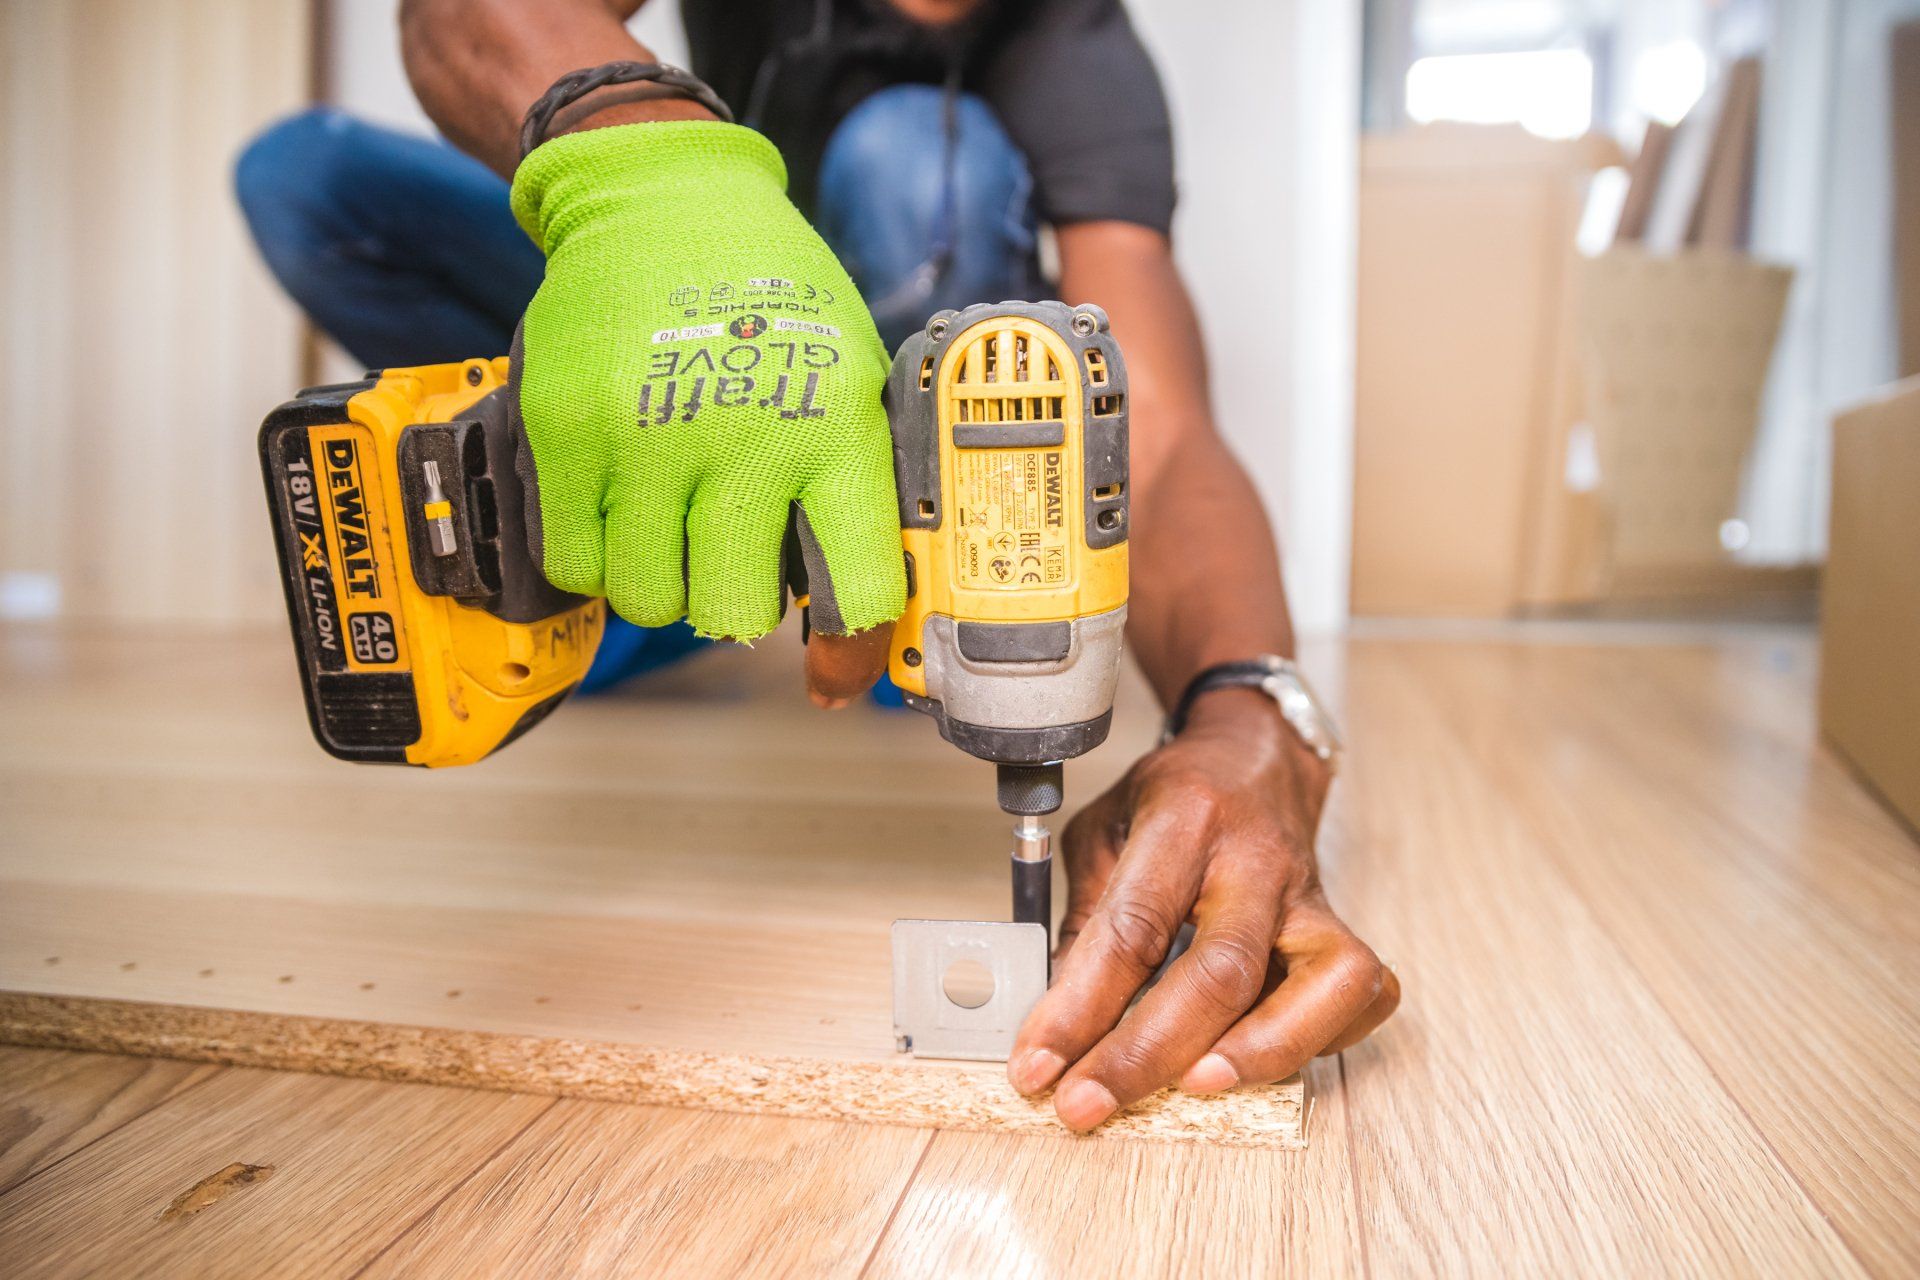 Workers hands holding an electric drill